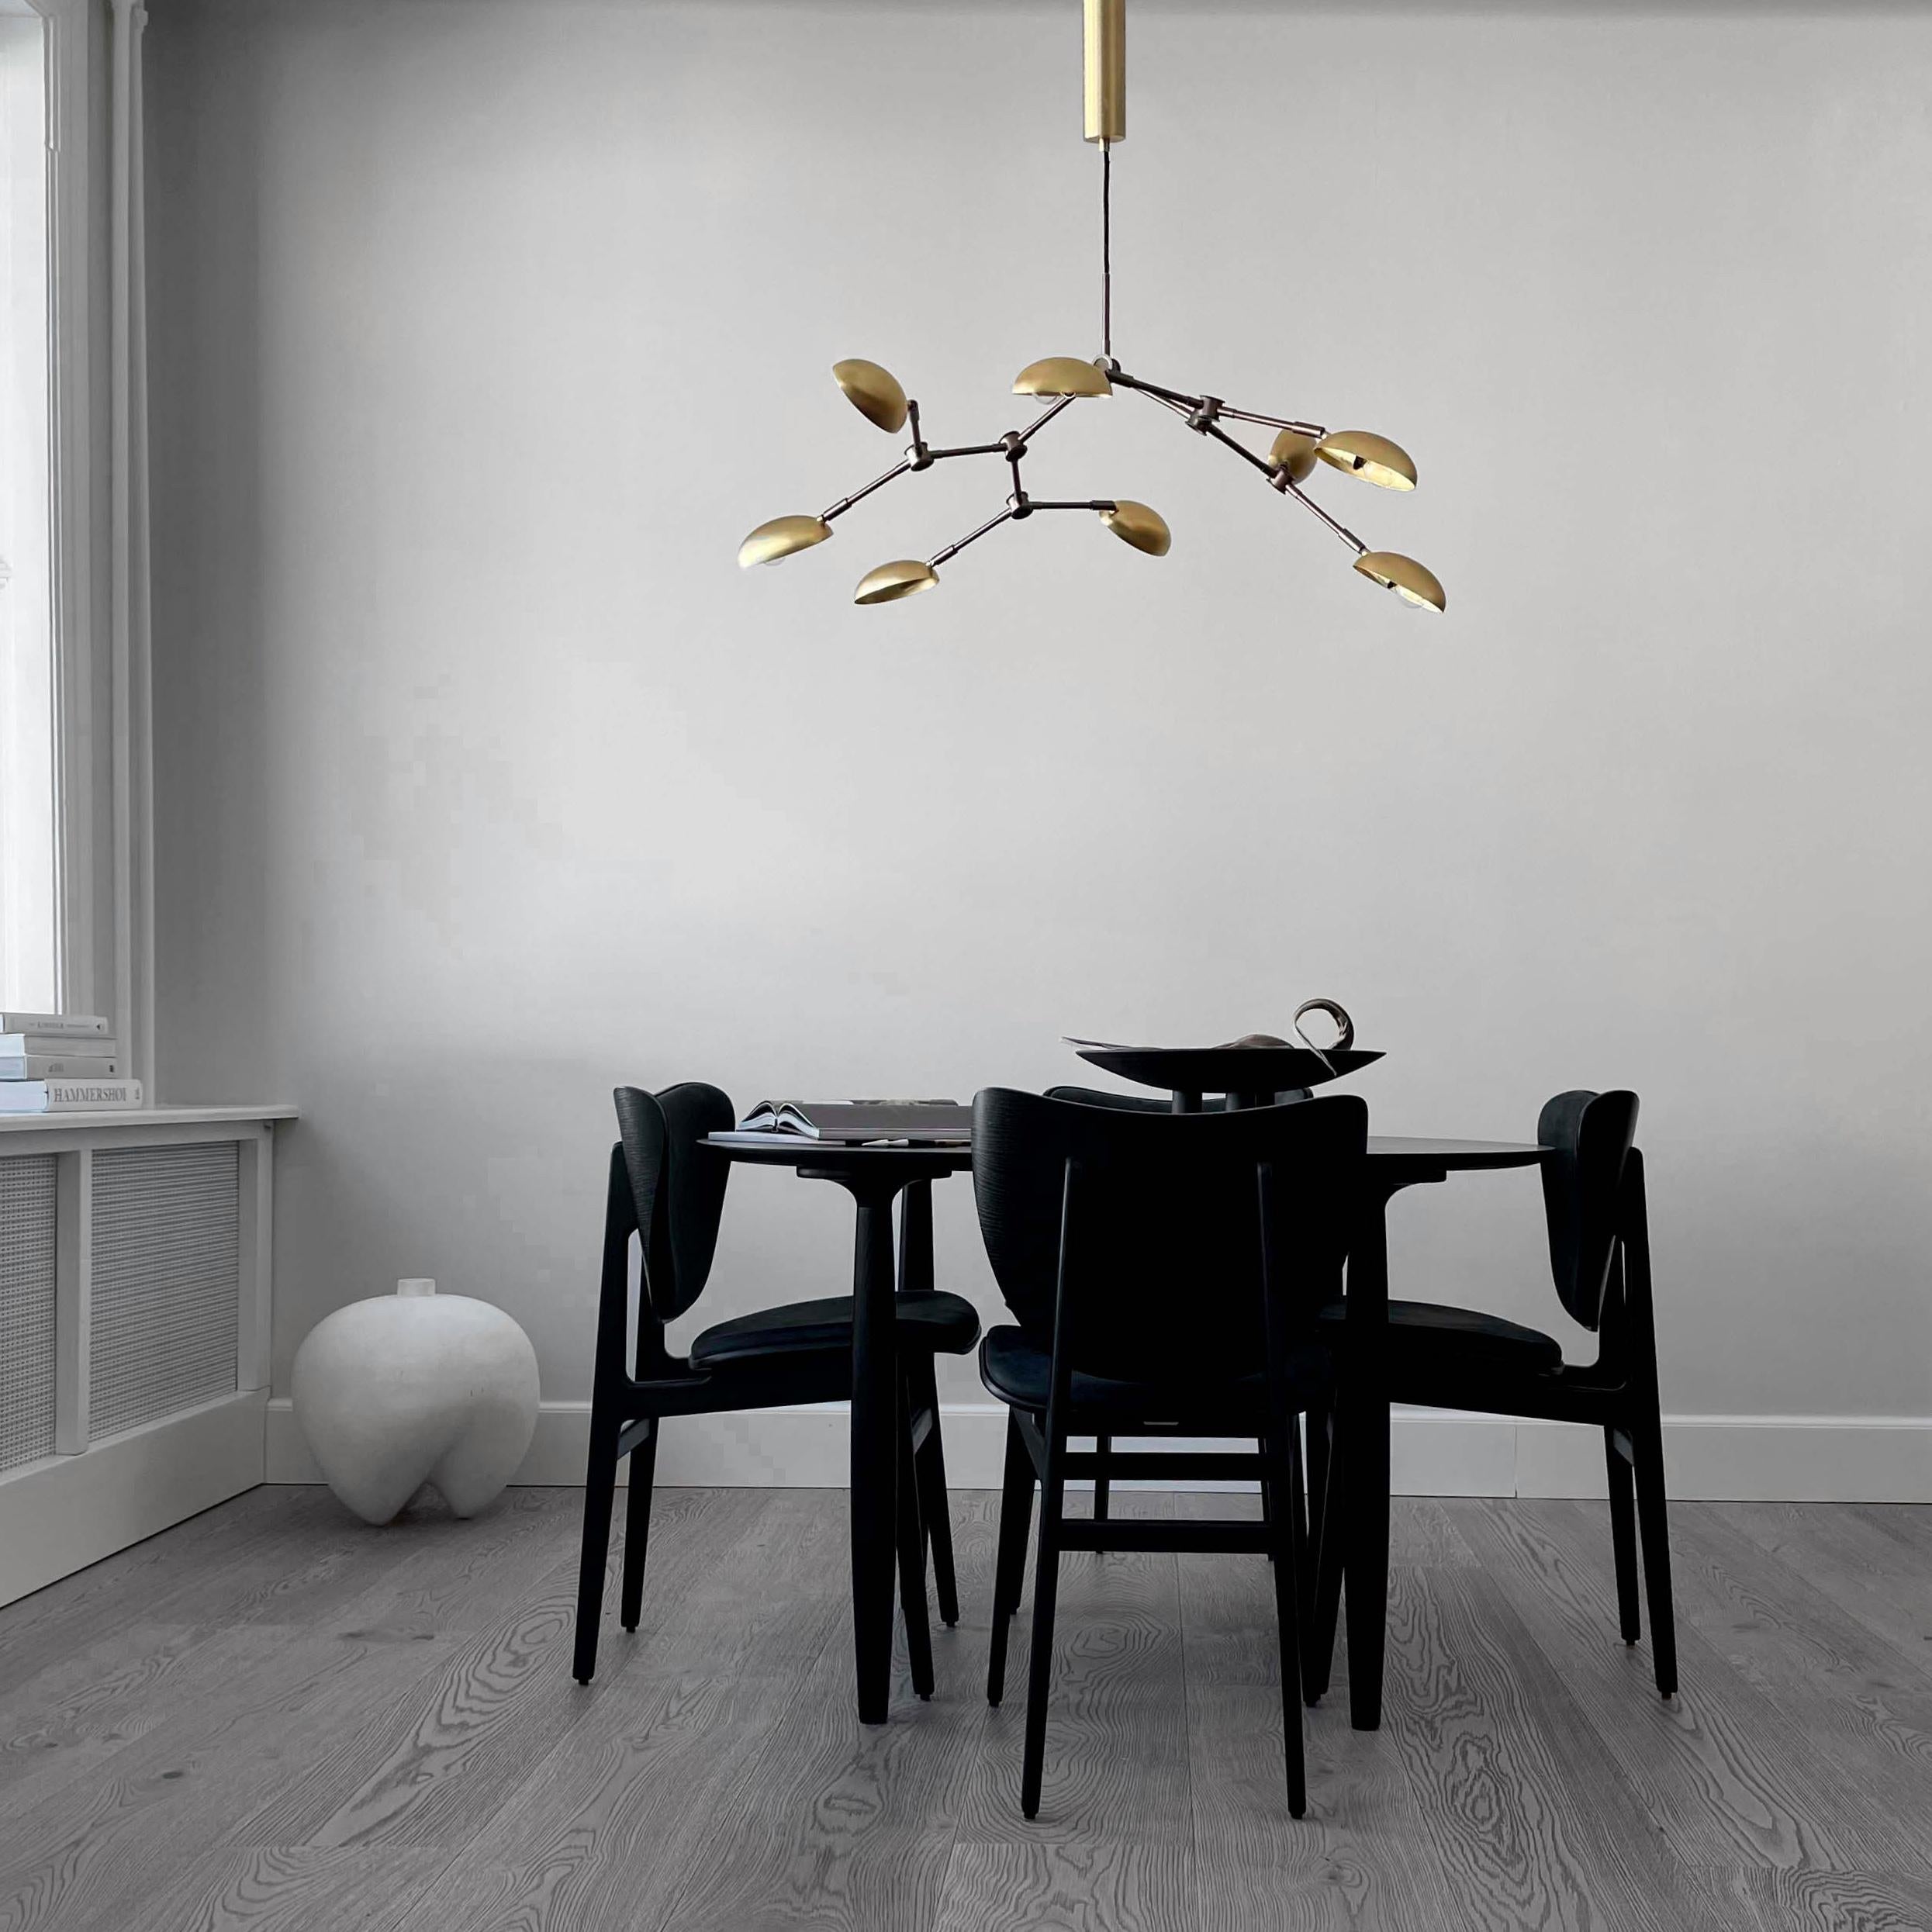 Drop chandelier brass by 101 Copenhagen
Designed by Kristian Sofus Hansen & Tommy Hyldahl.
Dimensions: L155 x W91 x H21 cm
Materials: Brass; Lampshade & Ceiling cup: 100% Iron, with the plated brass finish; Pipes & attachment parts are made of